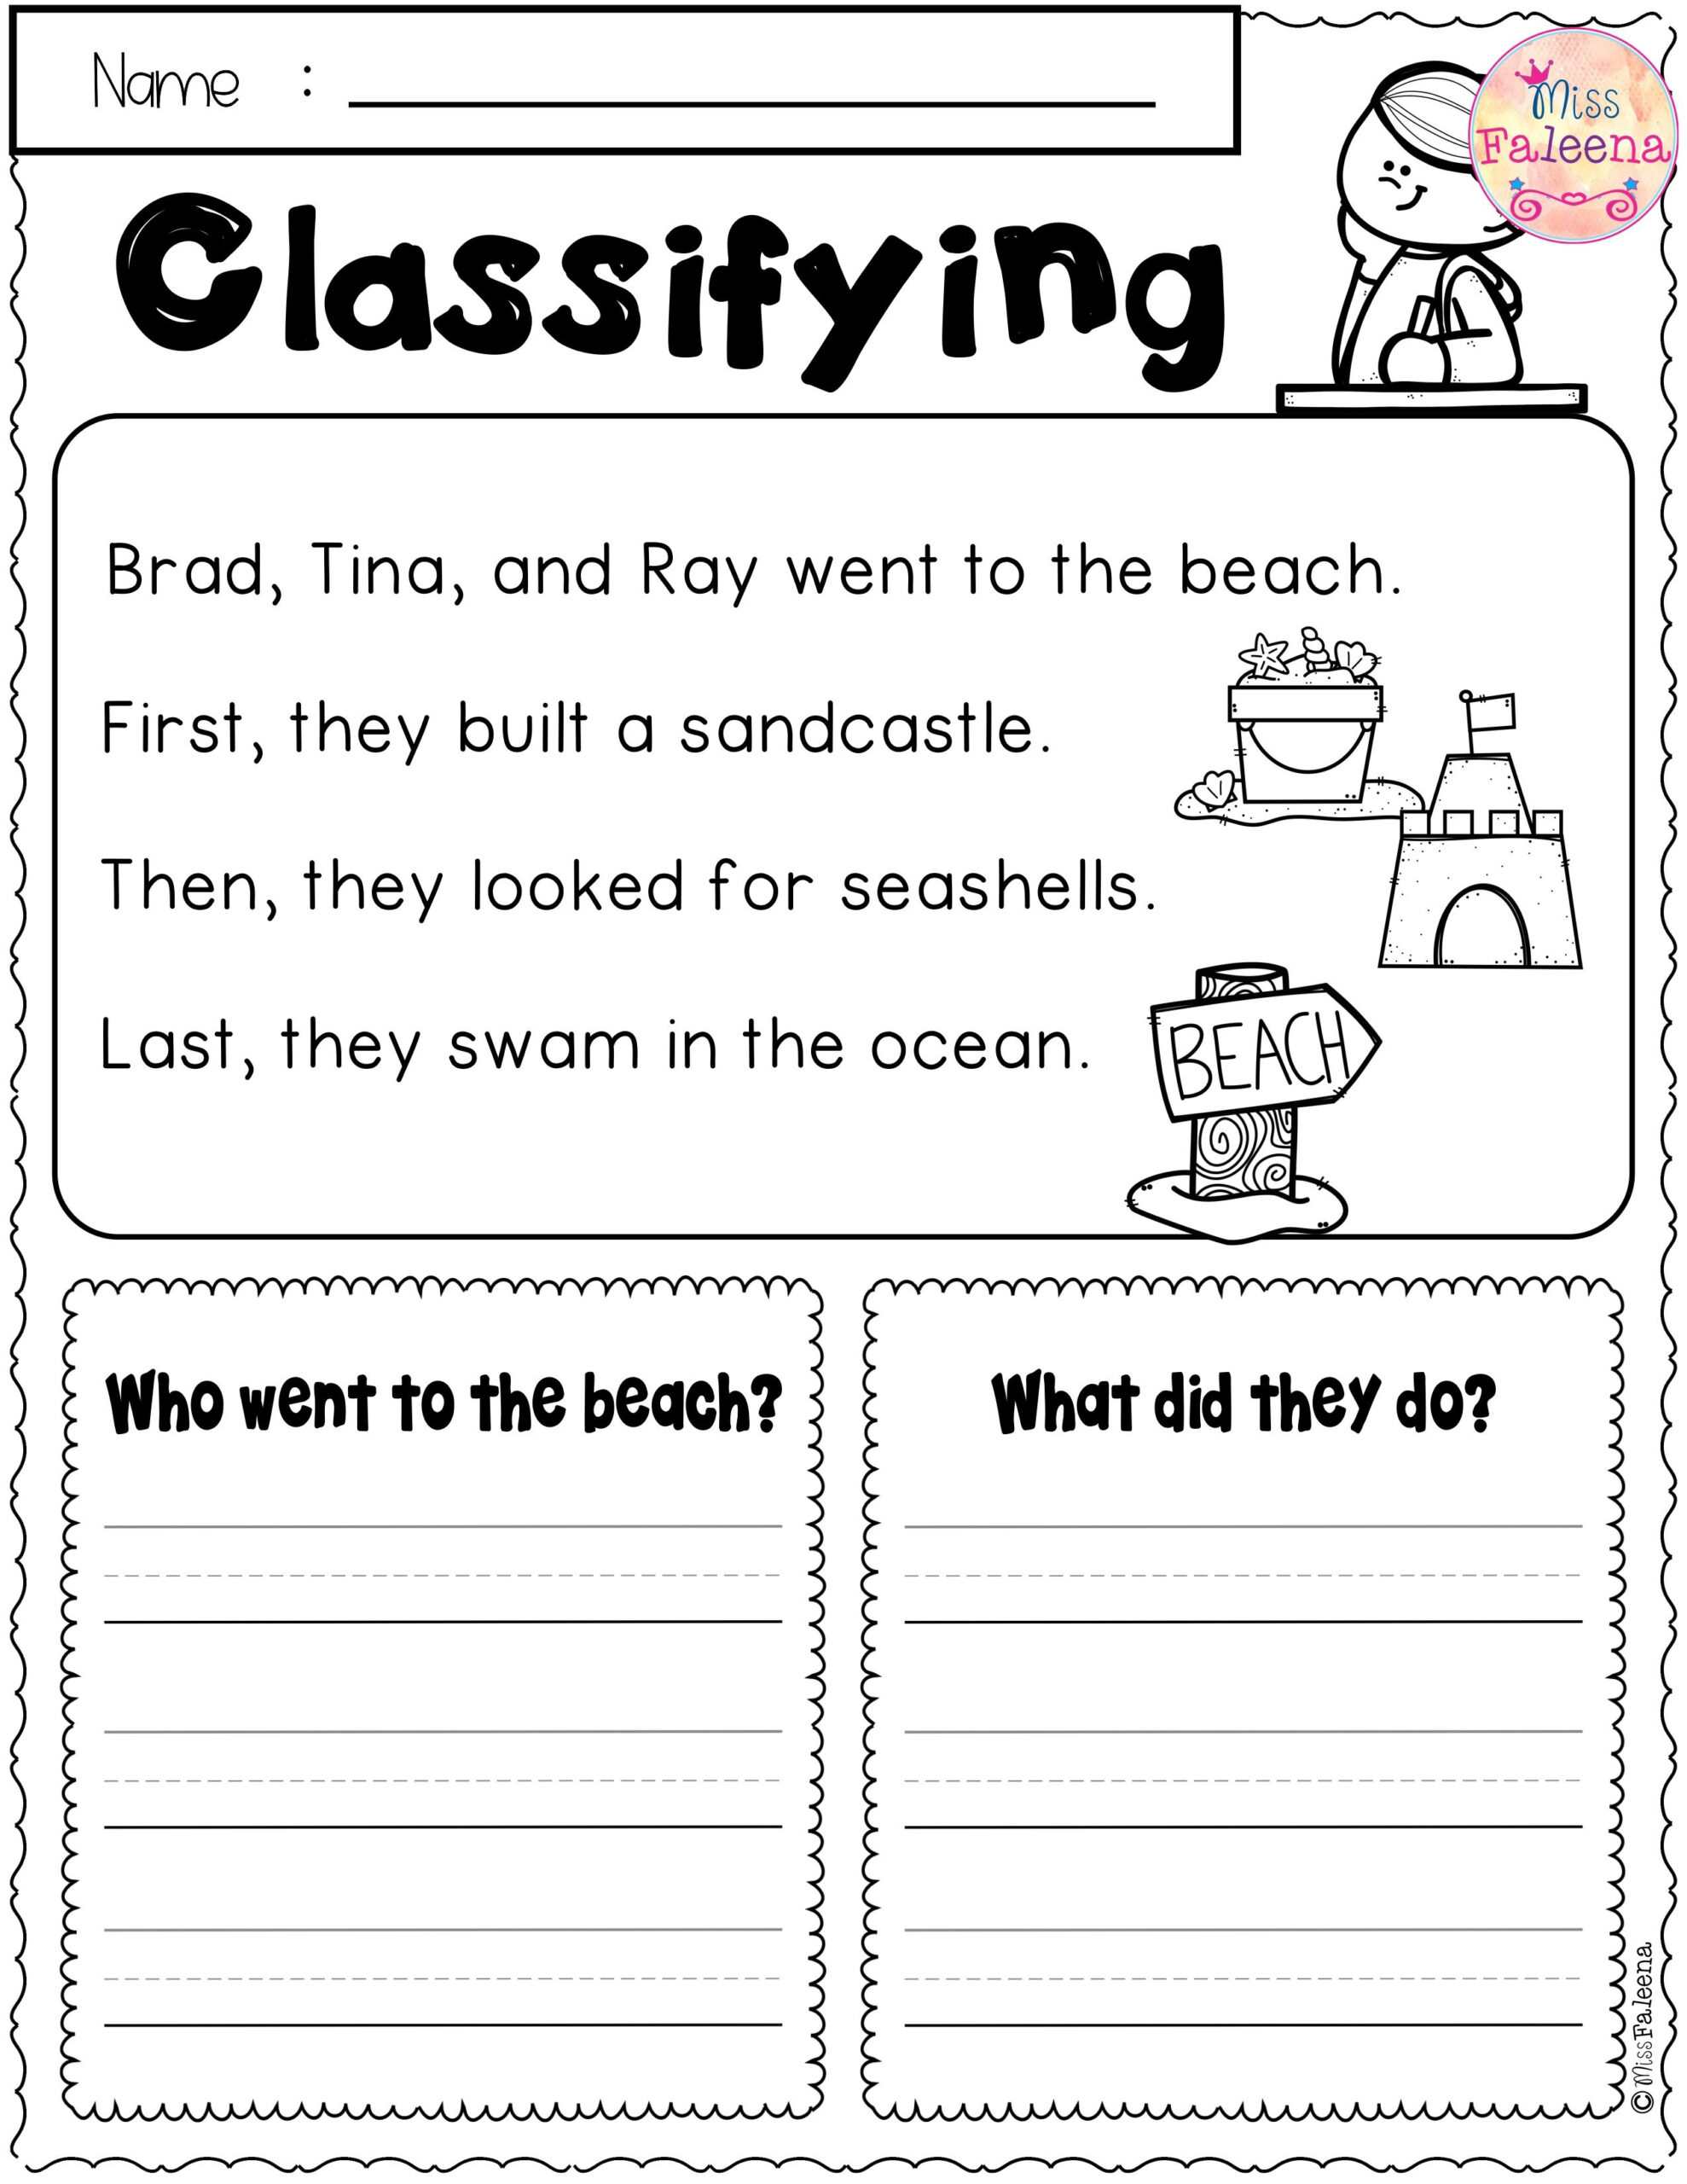 Free Reading Skills Contains 8 Pages Of Reading Skills Worksheets This 